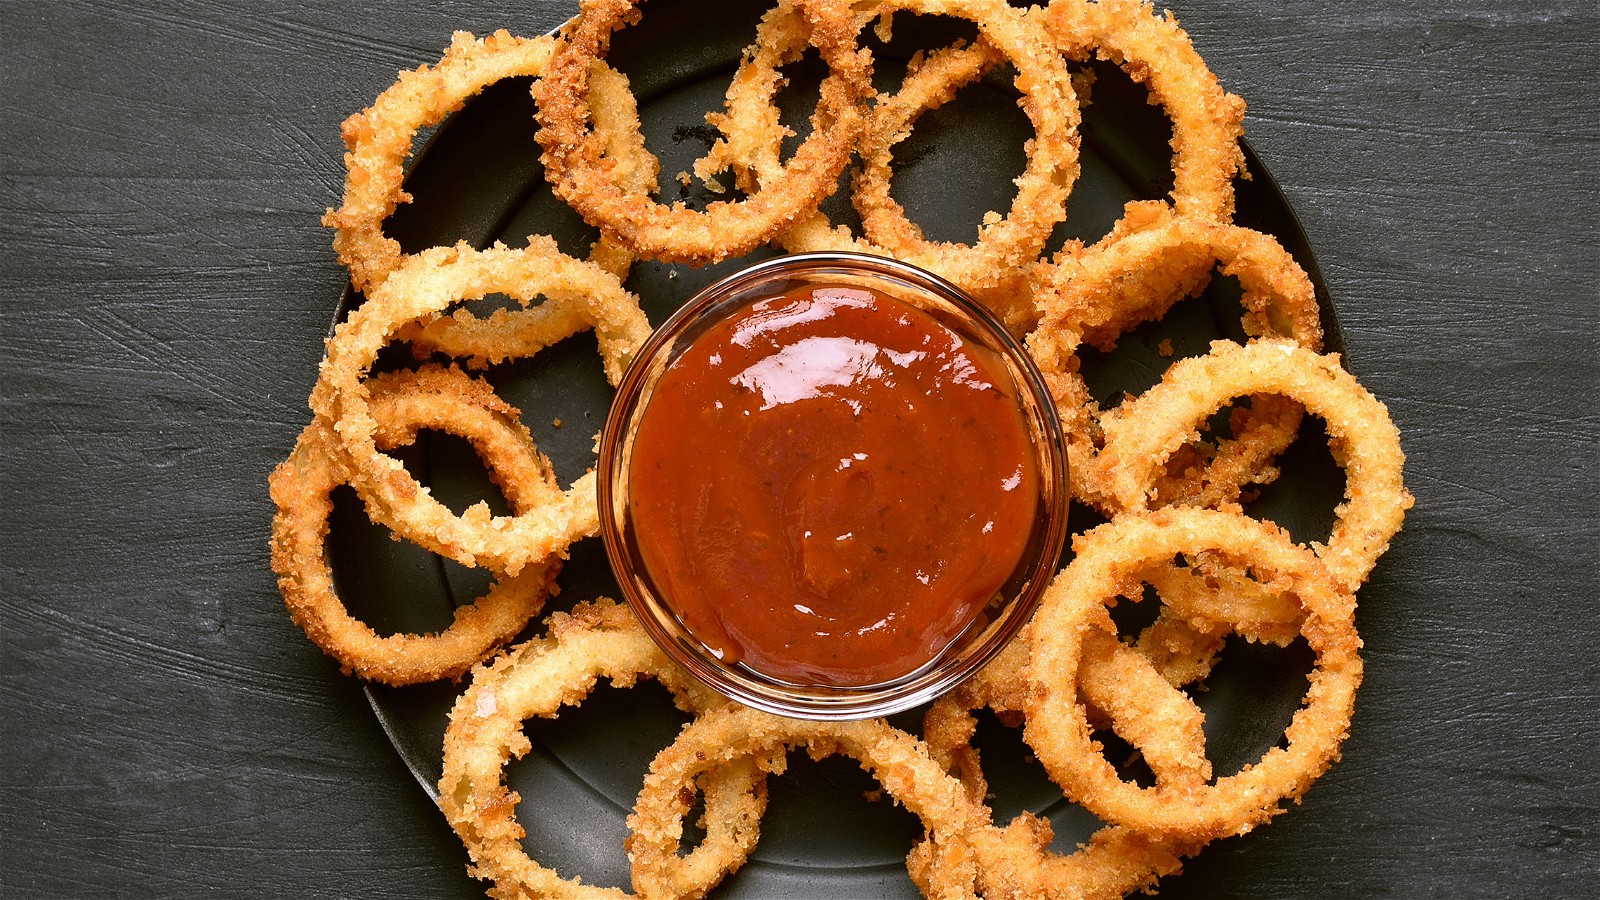 Image of G’DUNIONS (ONION RINGS)